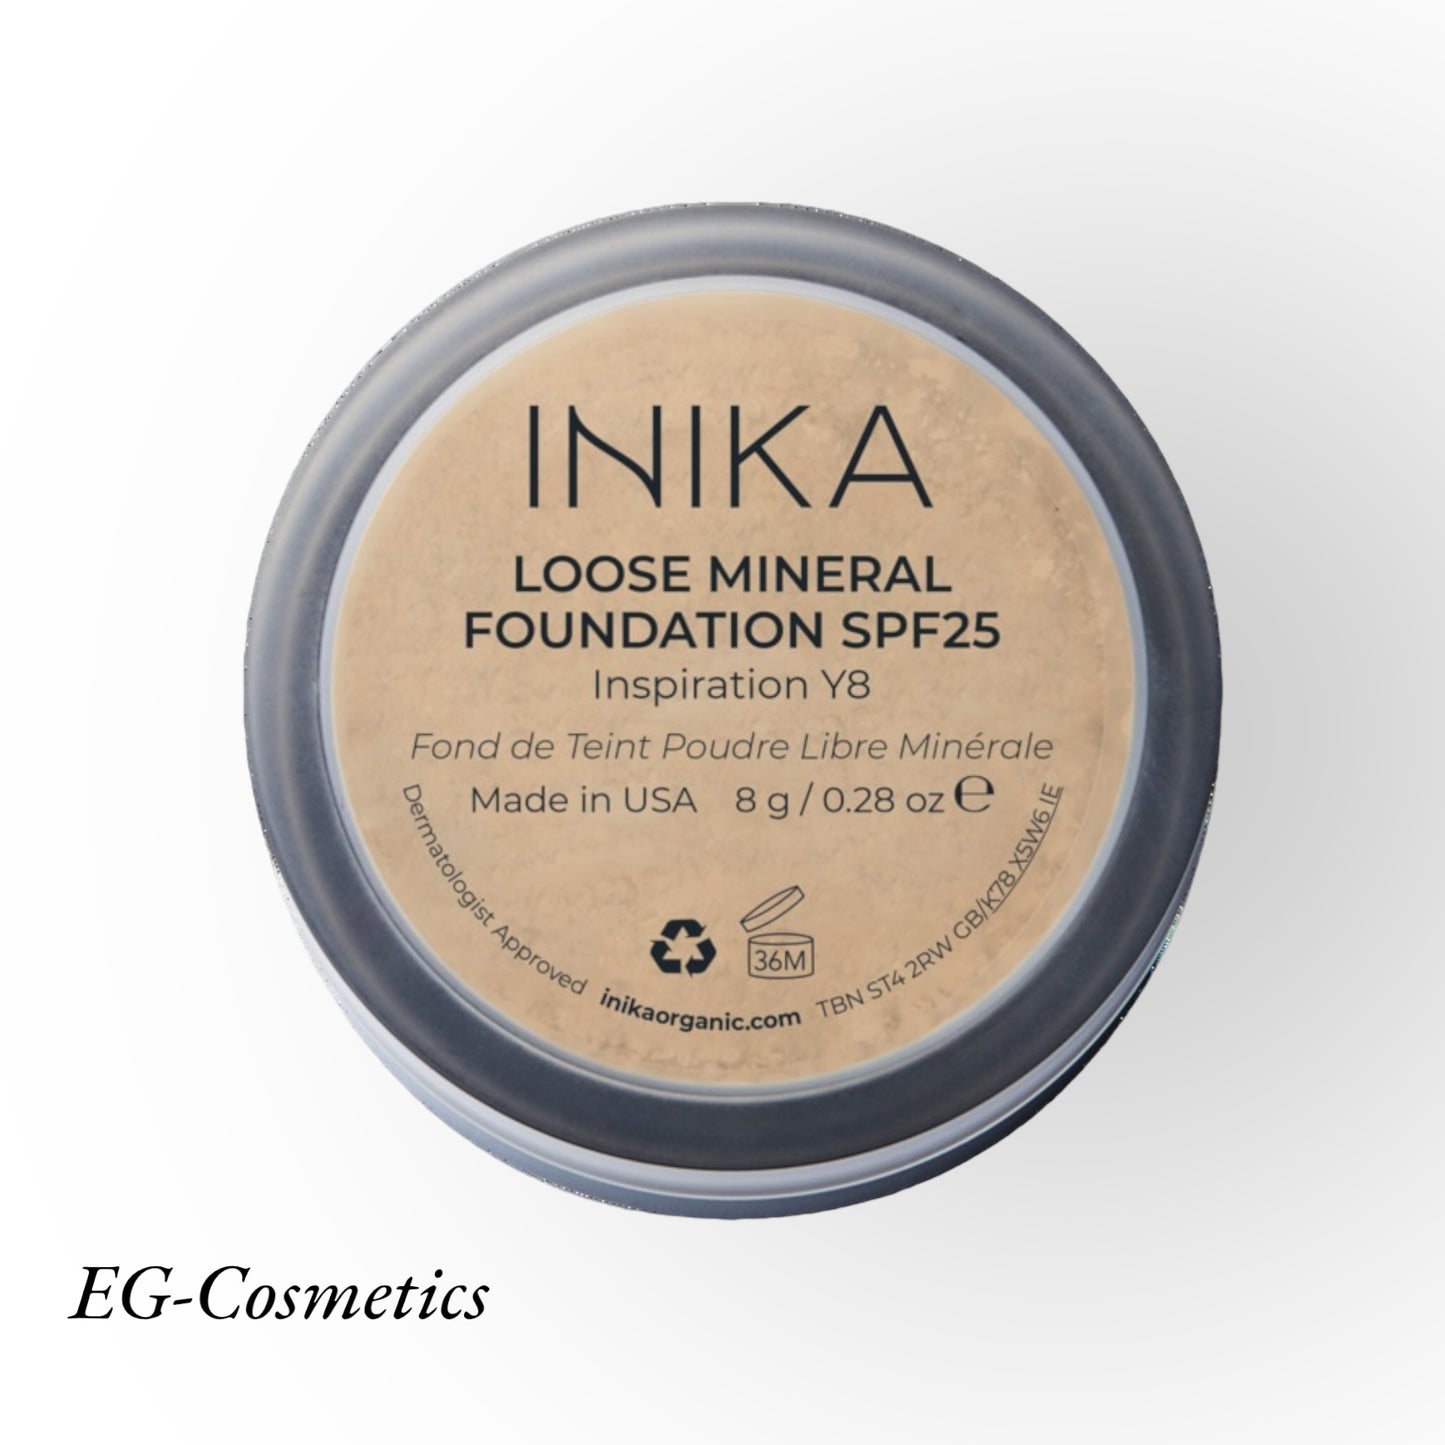 INIKA Certified Loose Mineral Foundation SPF25 8g INSPIRATION